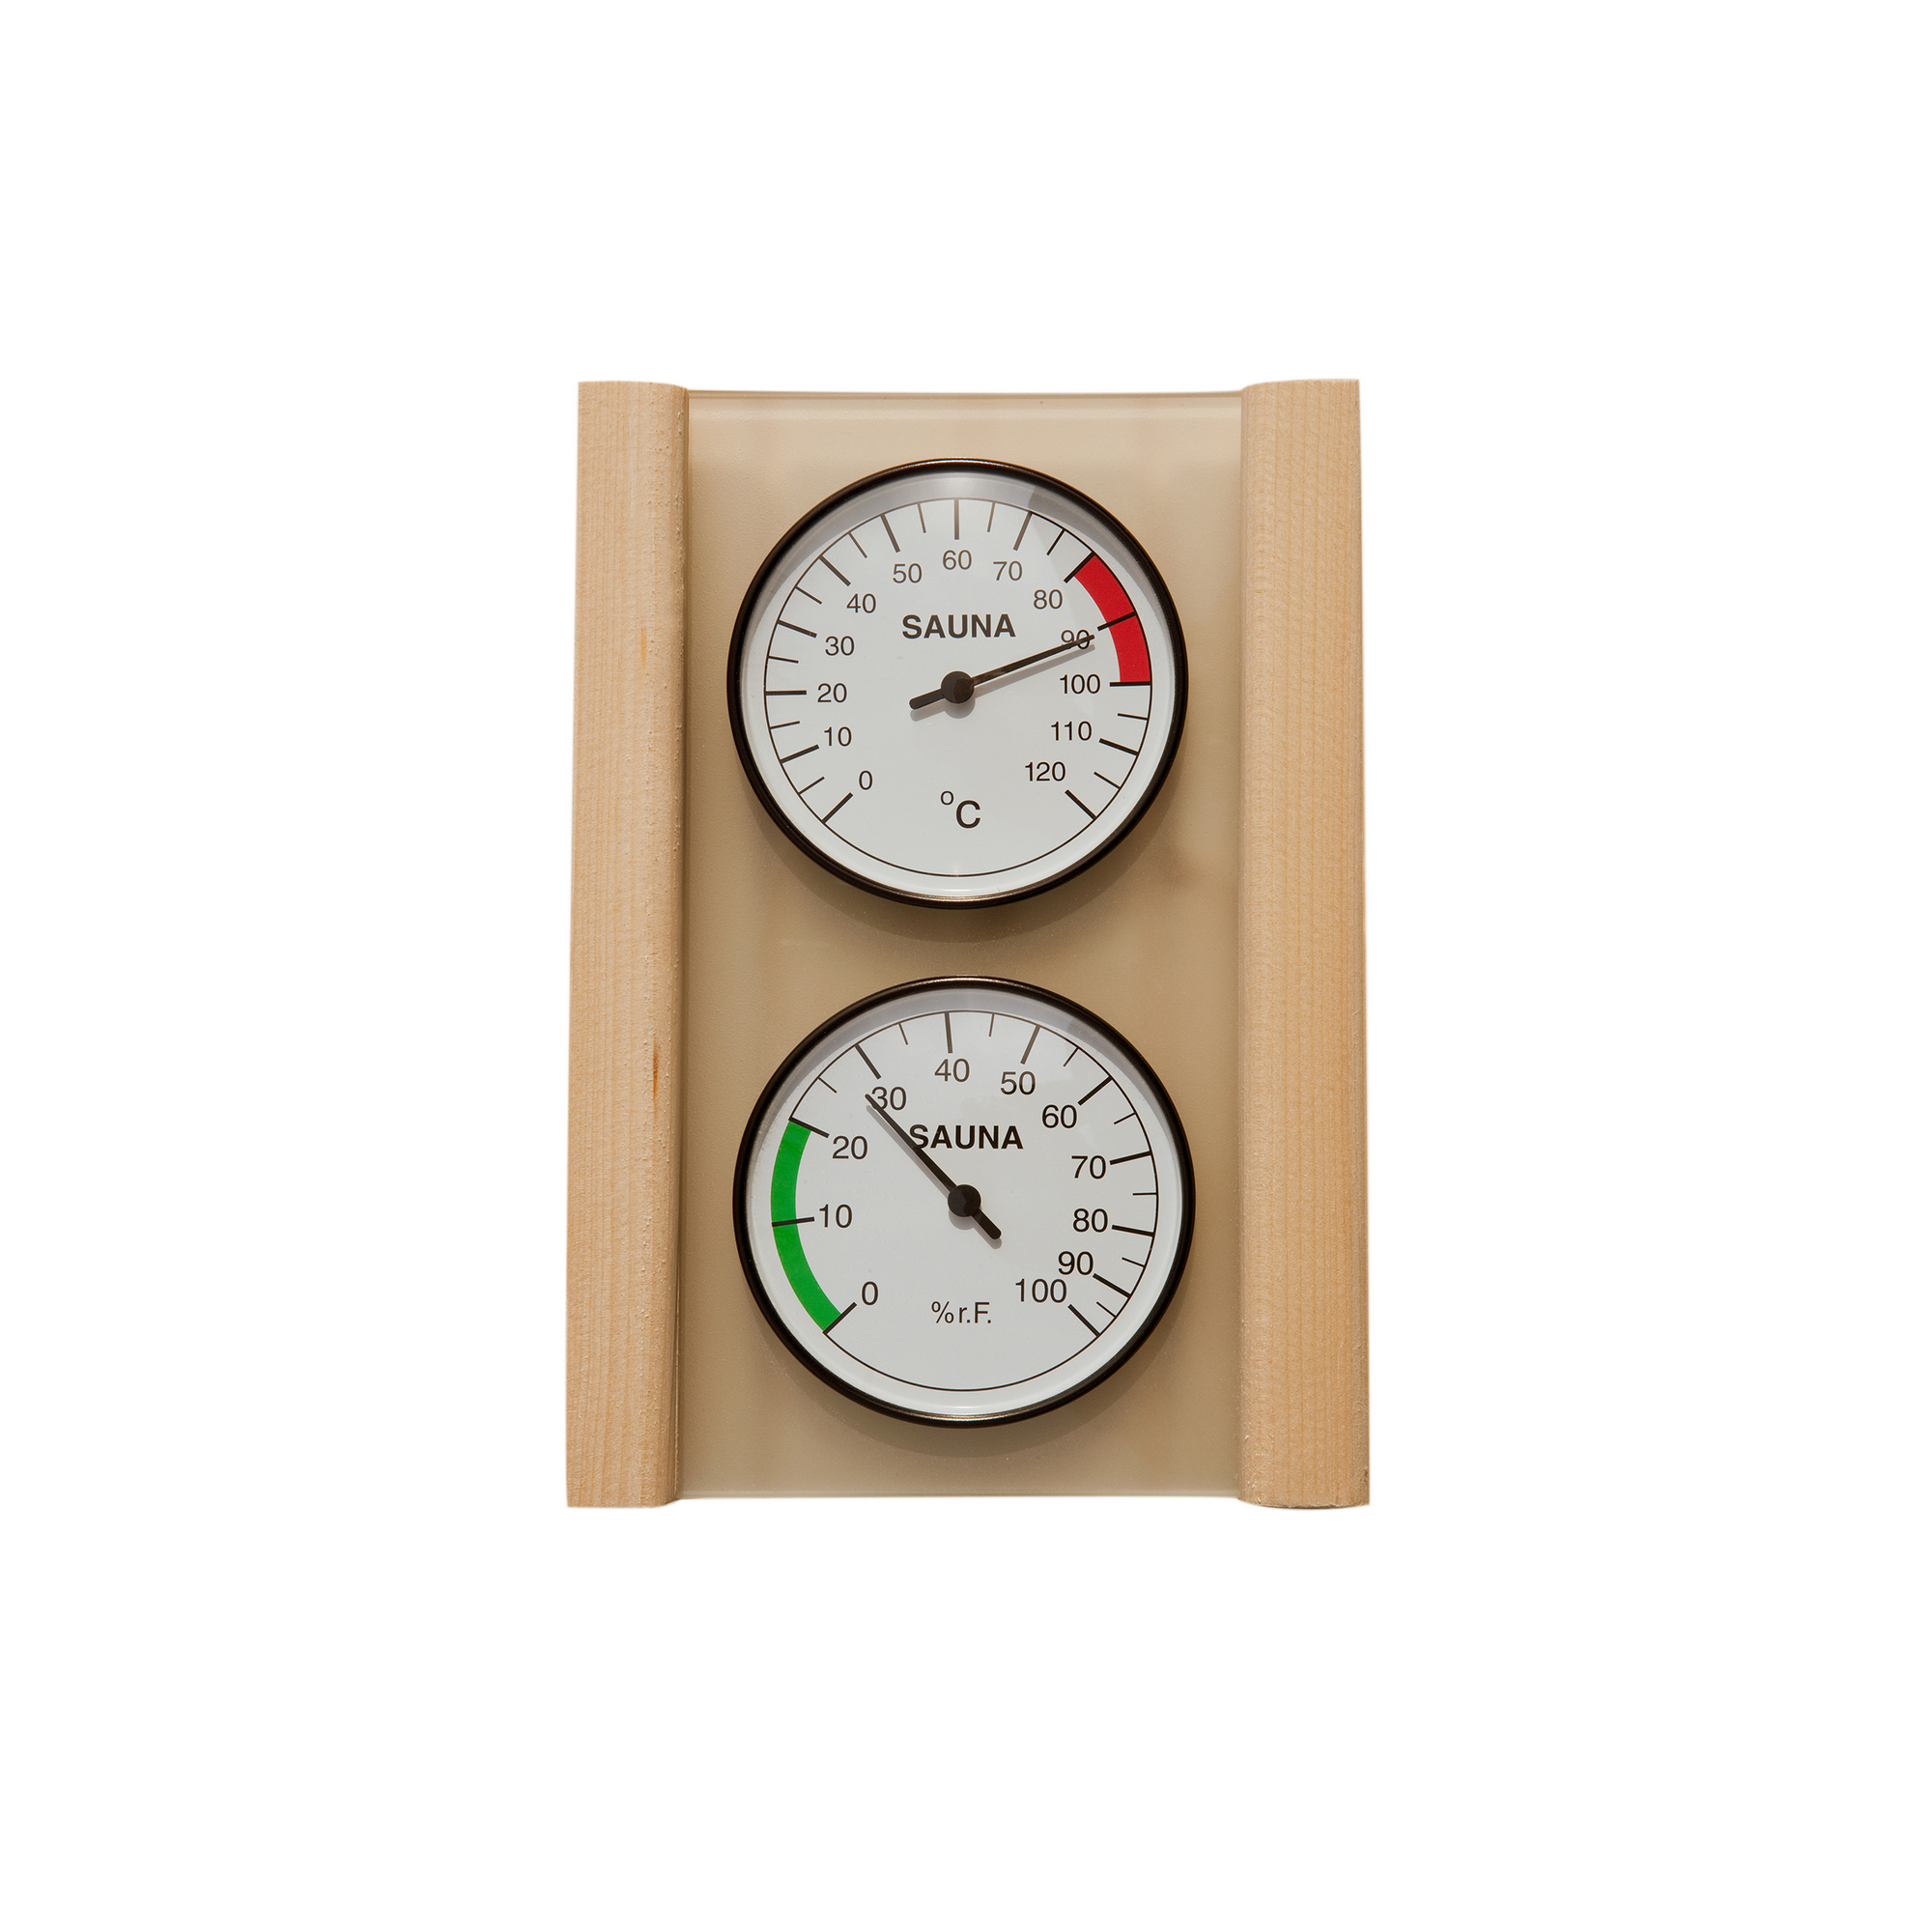 Hygro-/Thermometer + product picture